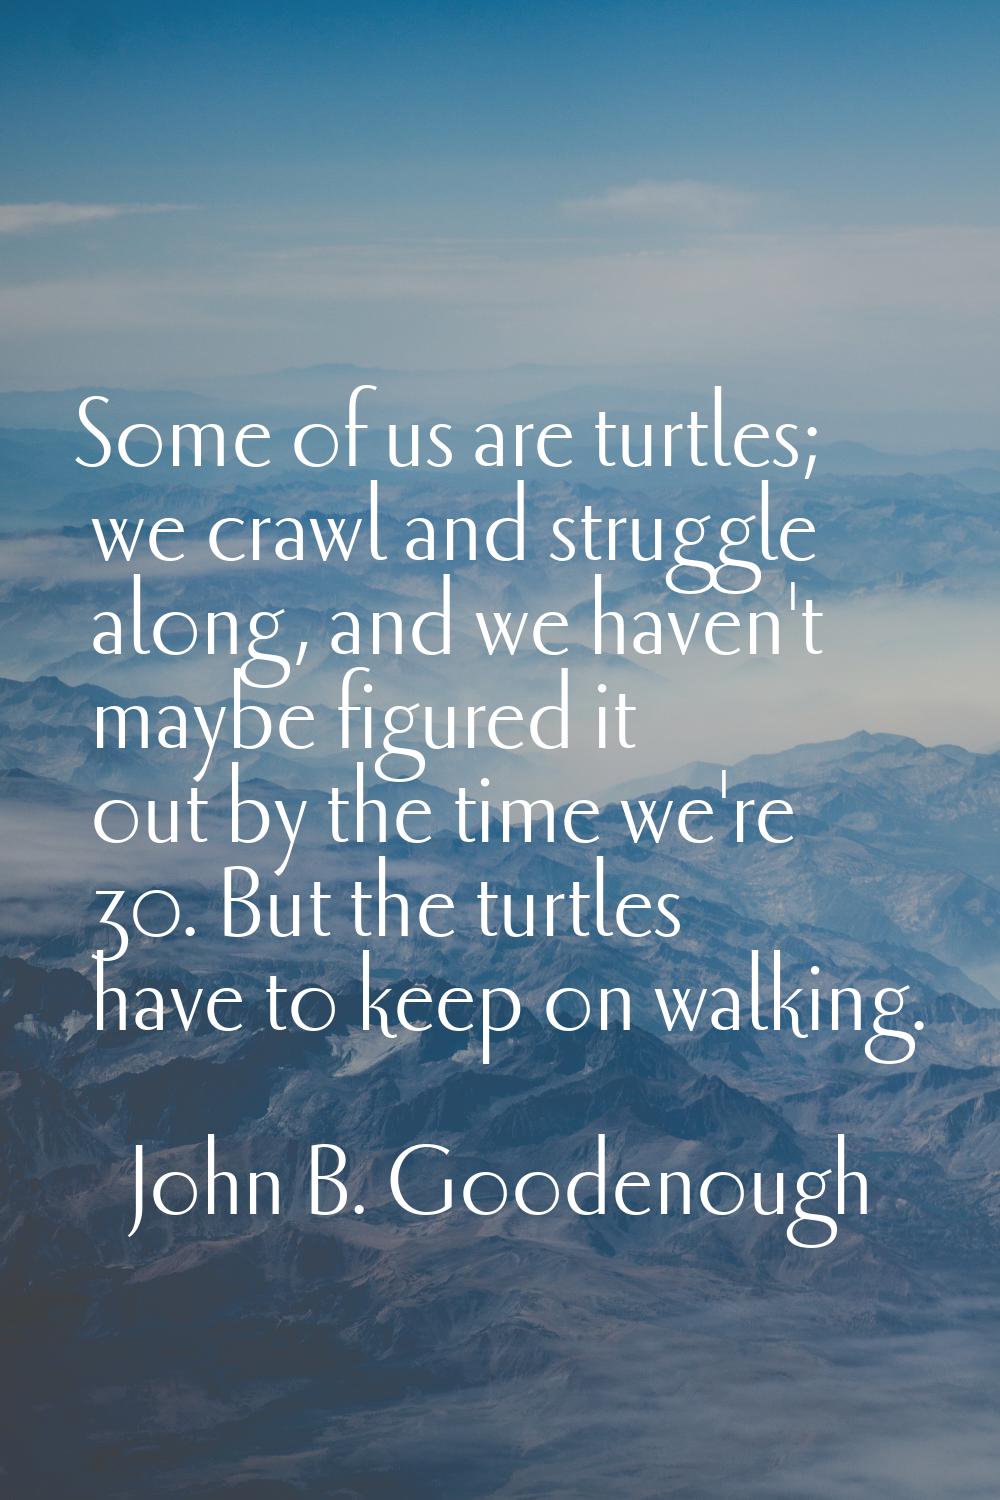 Some of us are turtles; we crawl and struggle along, and we haven't maybe figured it out by the tim